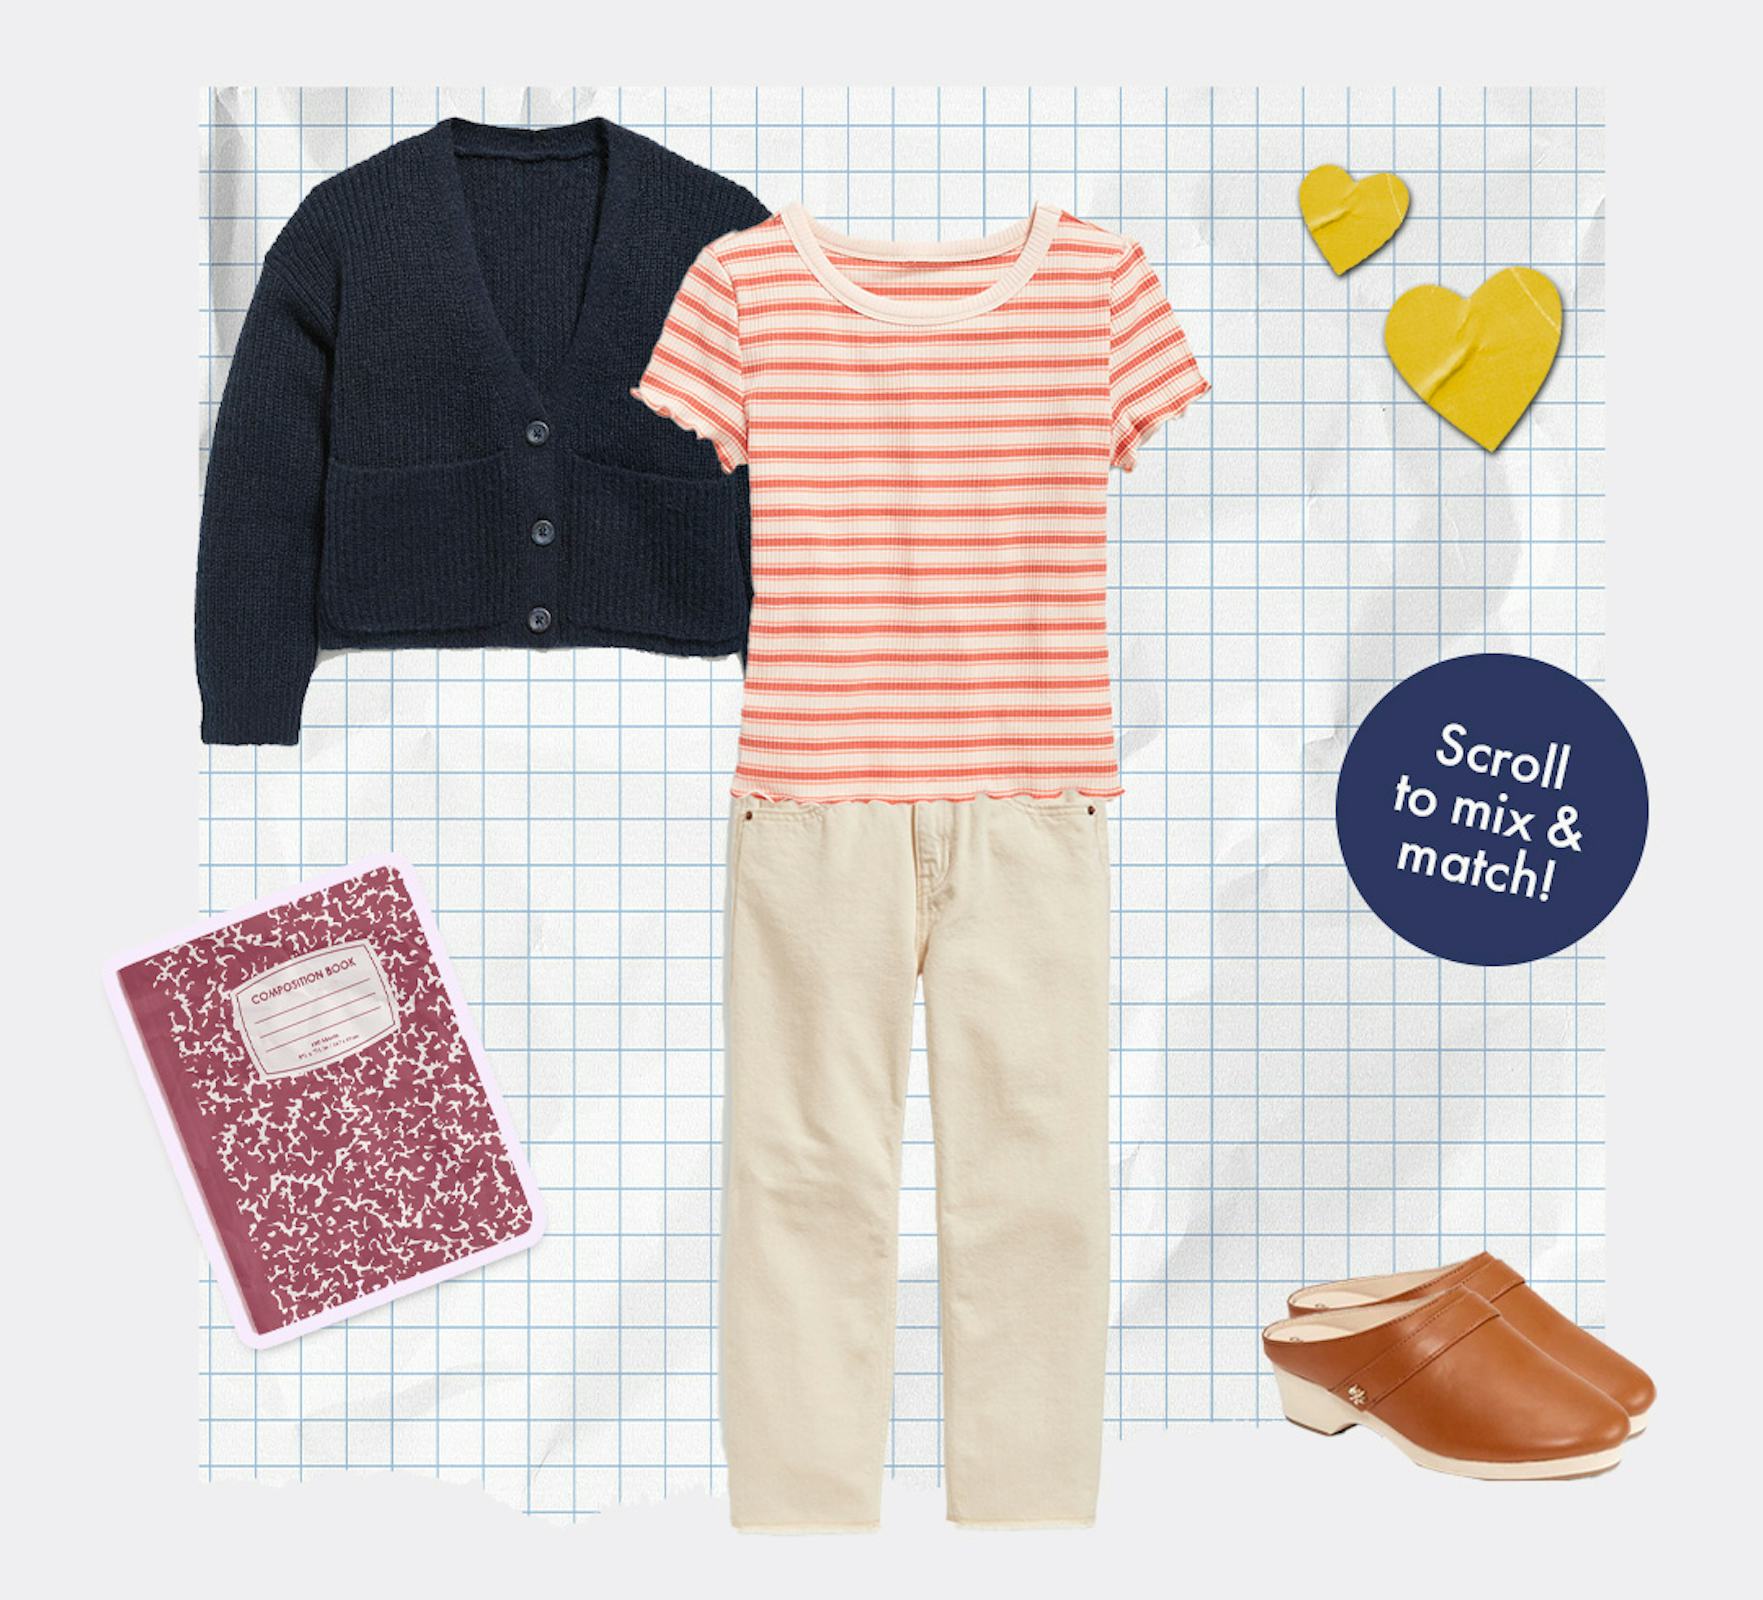 A black knit sweater, a white-peach striped shirt, white denim jeans and brown clog shoes